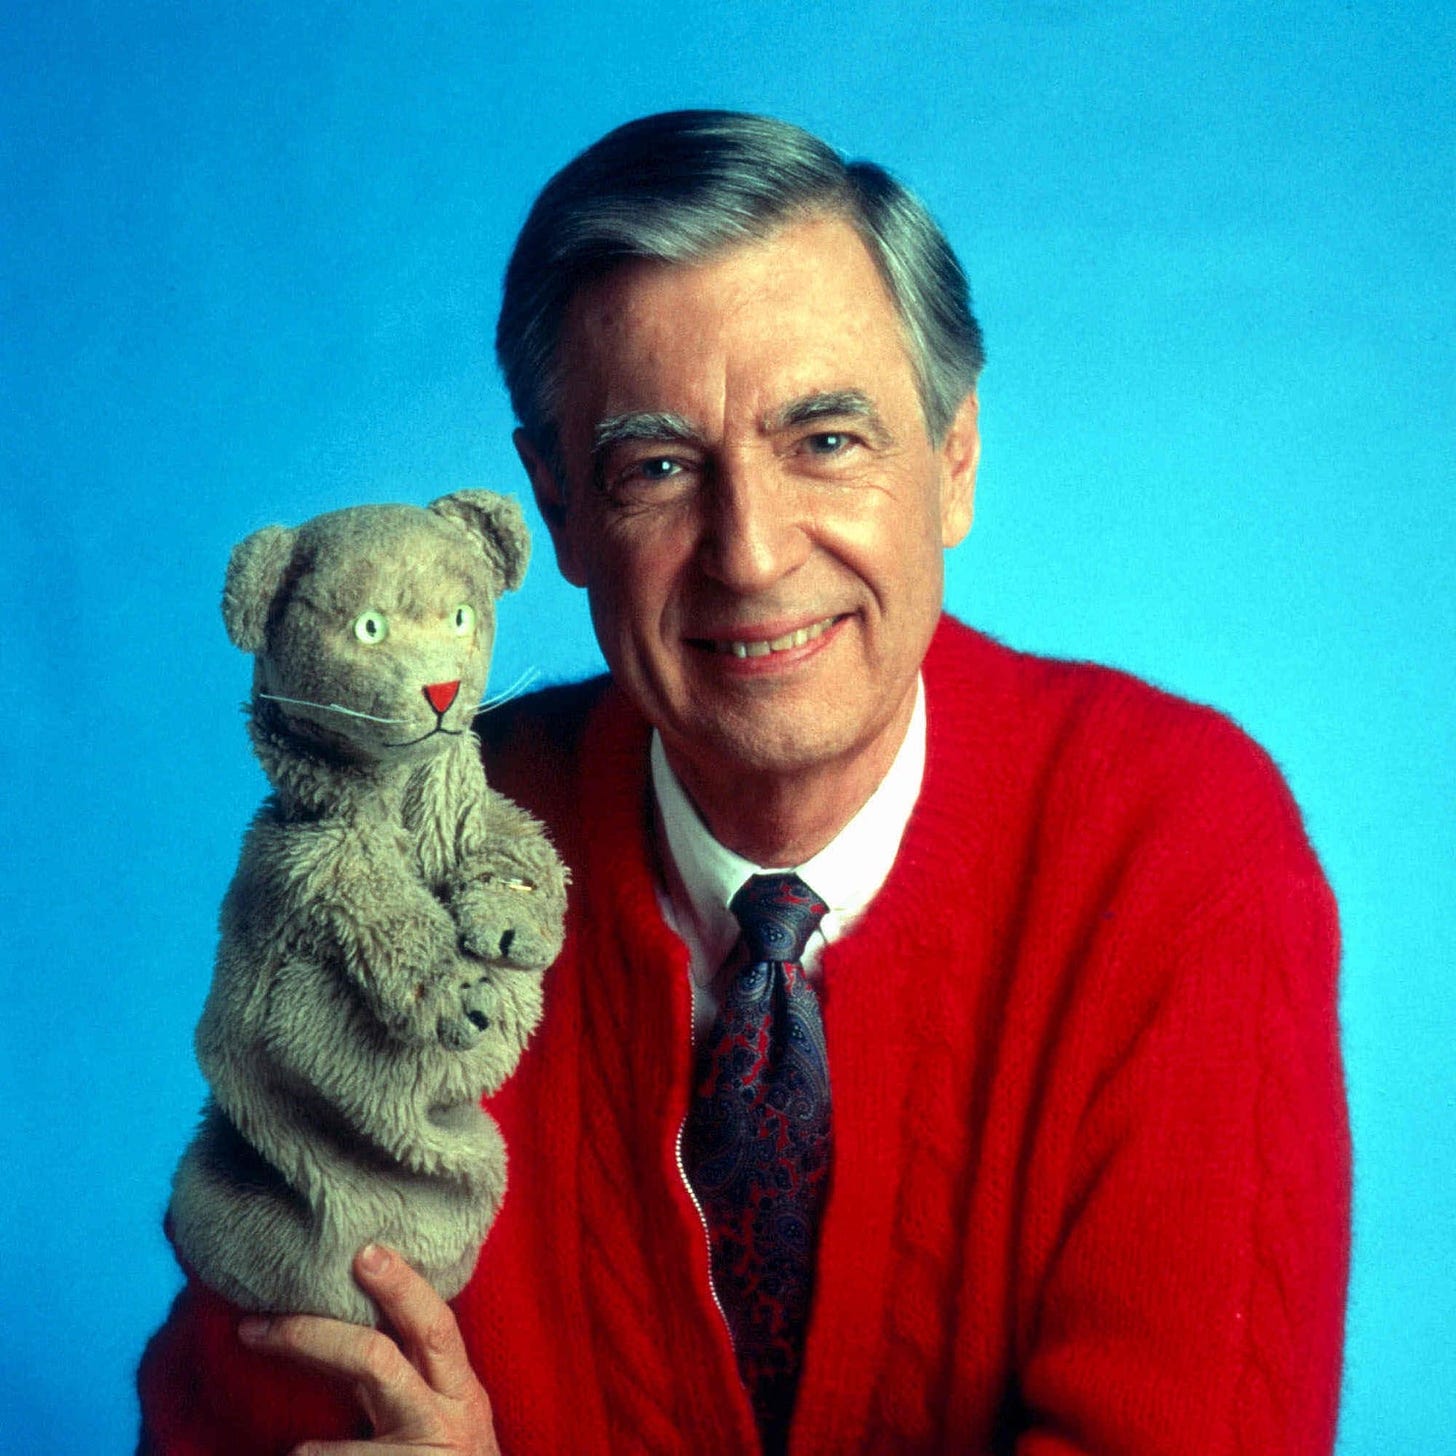 Mister Rogers’ wisdom remixed into song ‘Garden of Your Mind’ - The ...